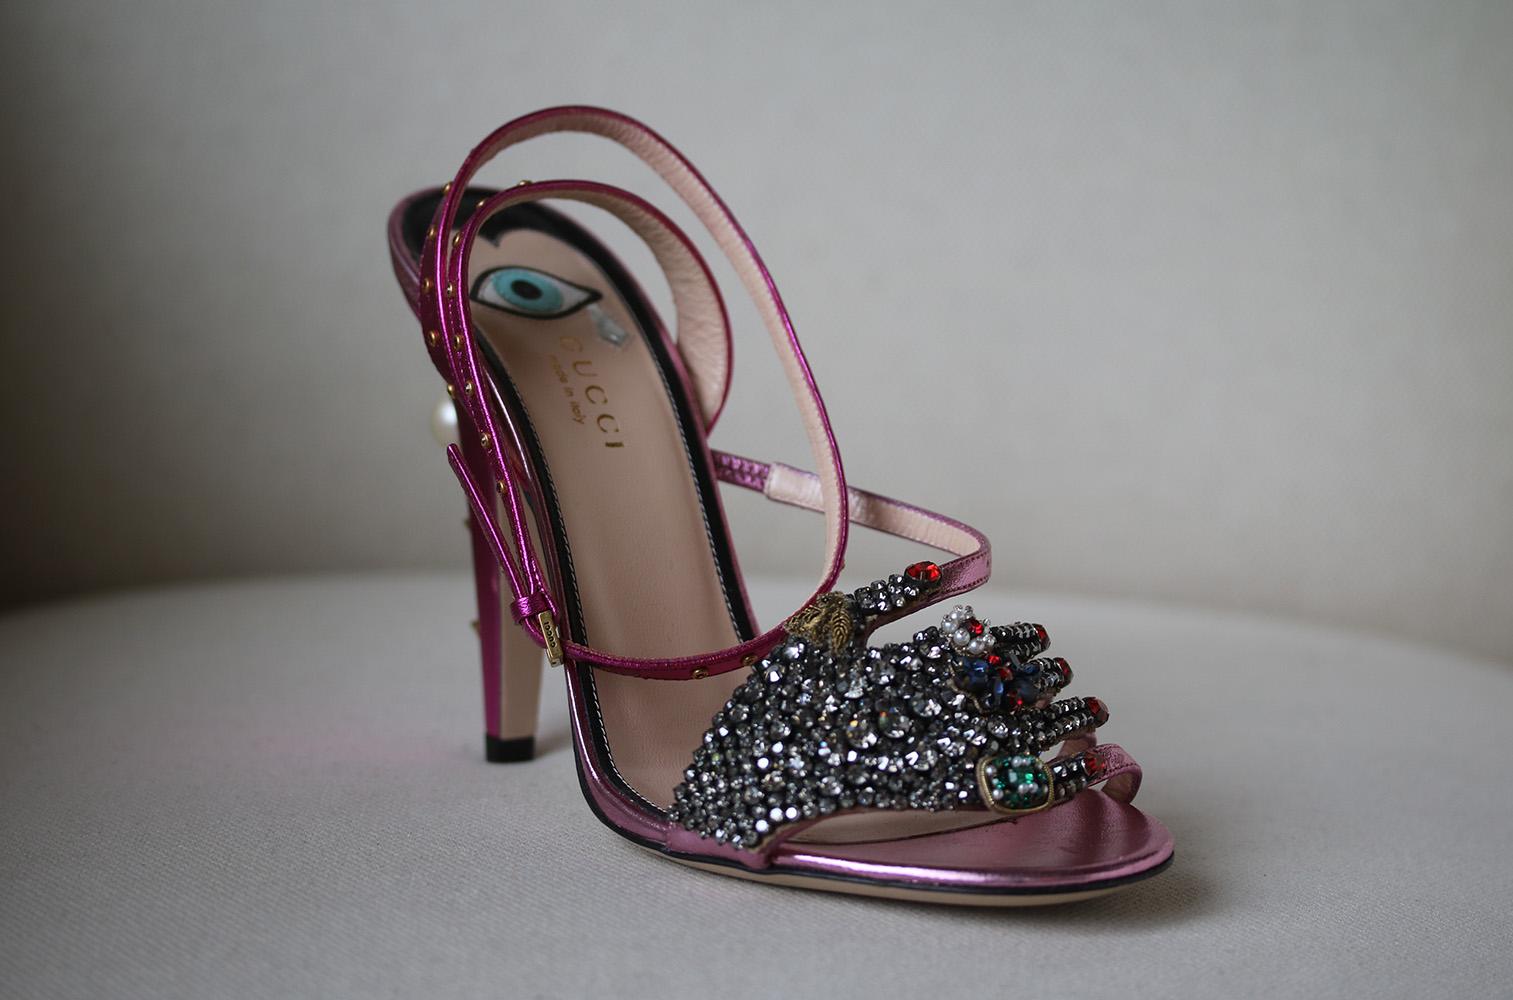 Constructed in italy according to gucci's exacting standards, these pink leather sandals will add a decorative flourish to even the most off-duty of days. The ideal choice for dressing up or down, these intricately detailed gucci sandals are